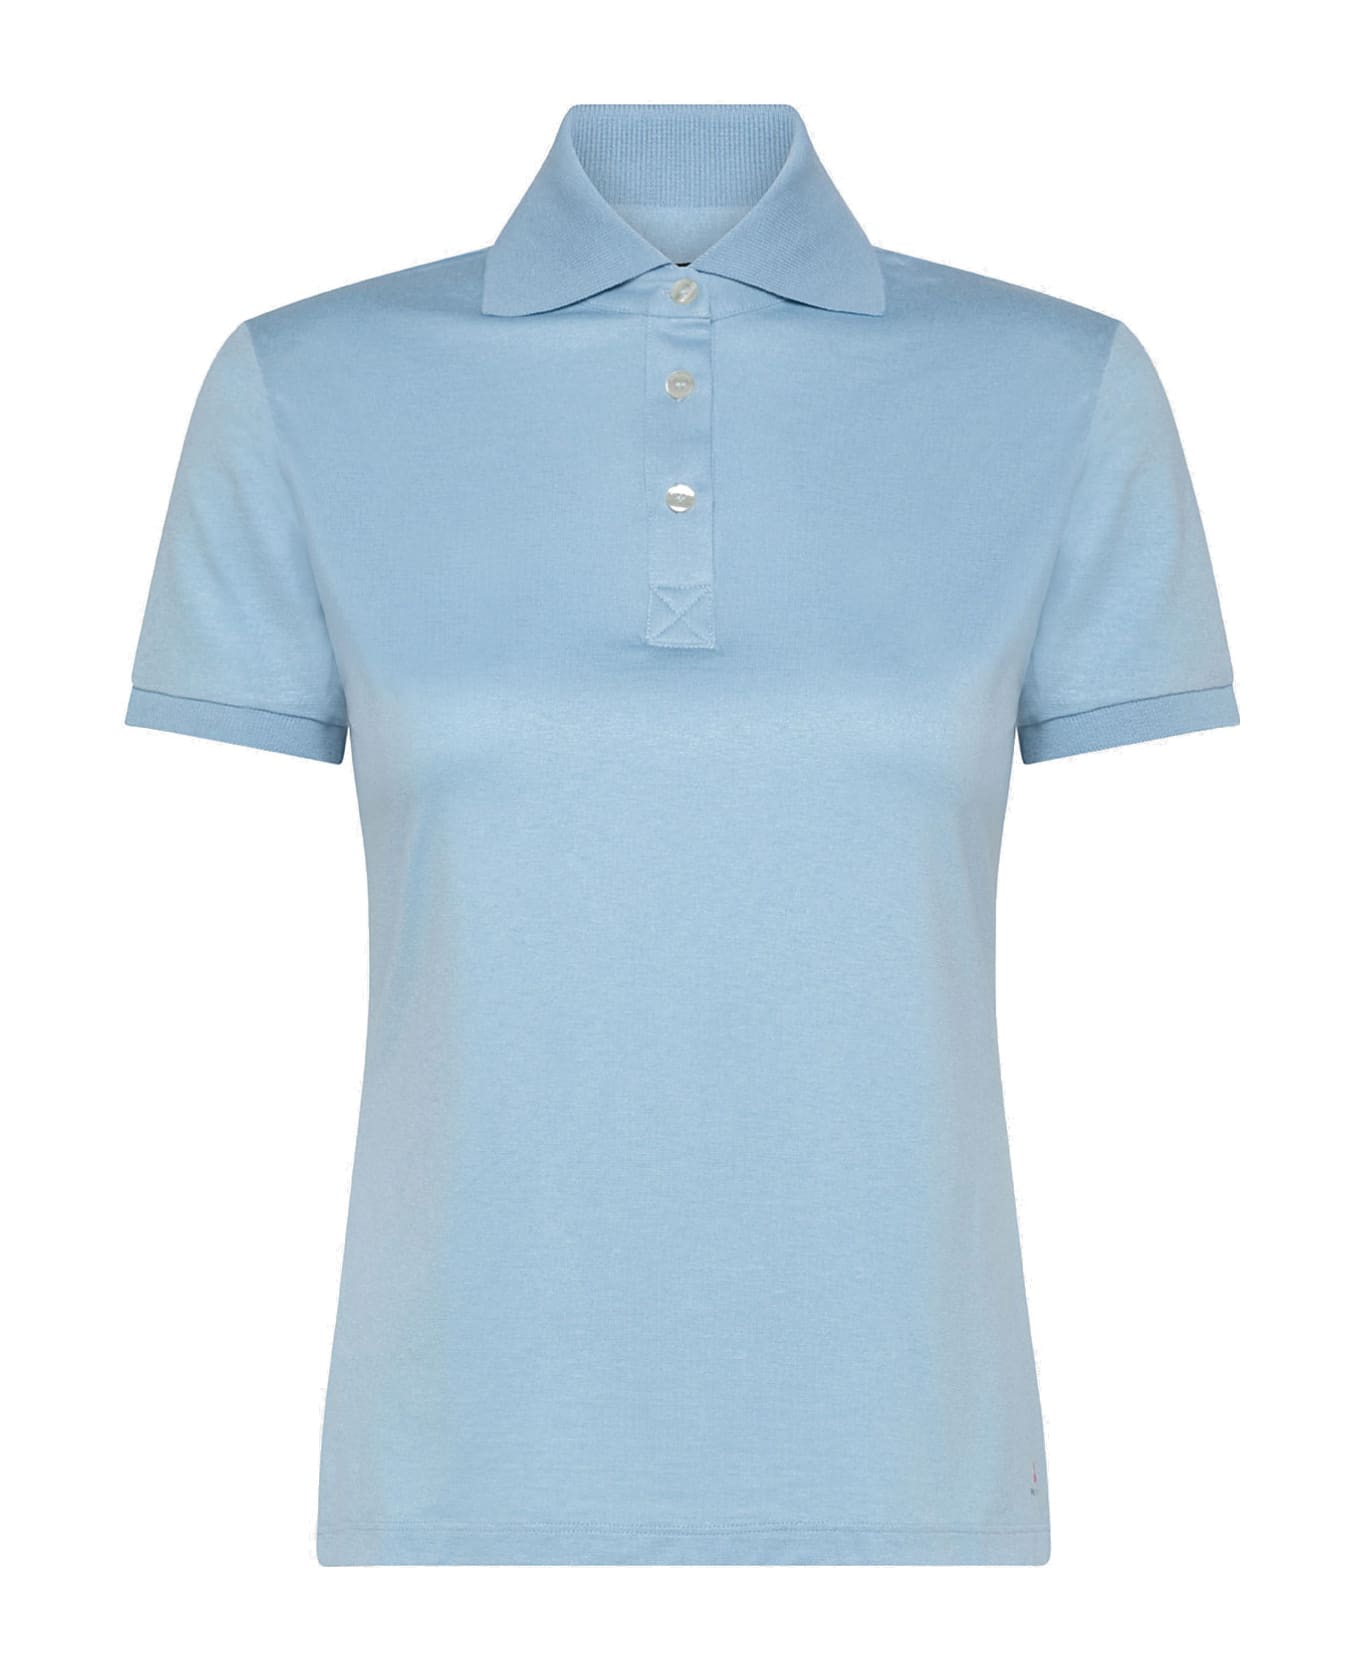 Peuterey Polo With 3 Buttons - AZZURRO